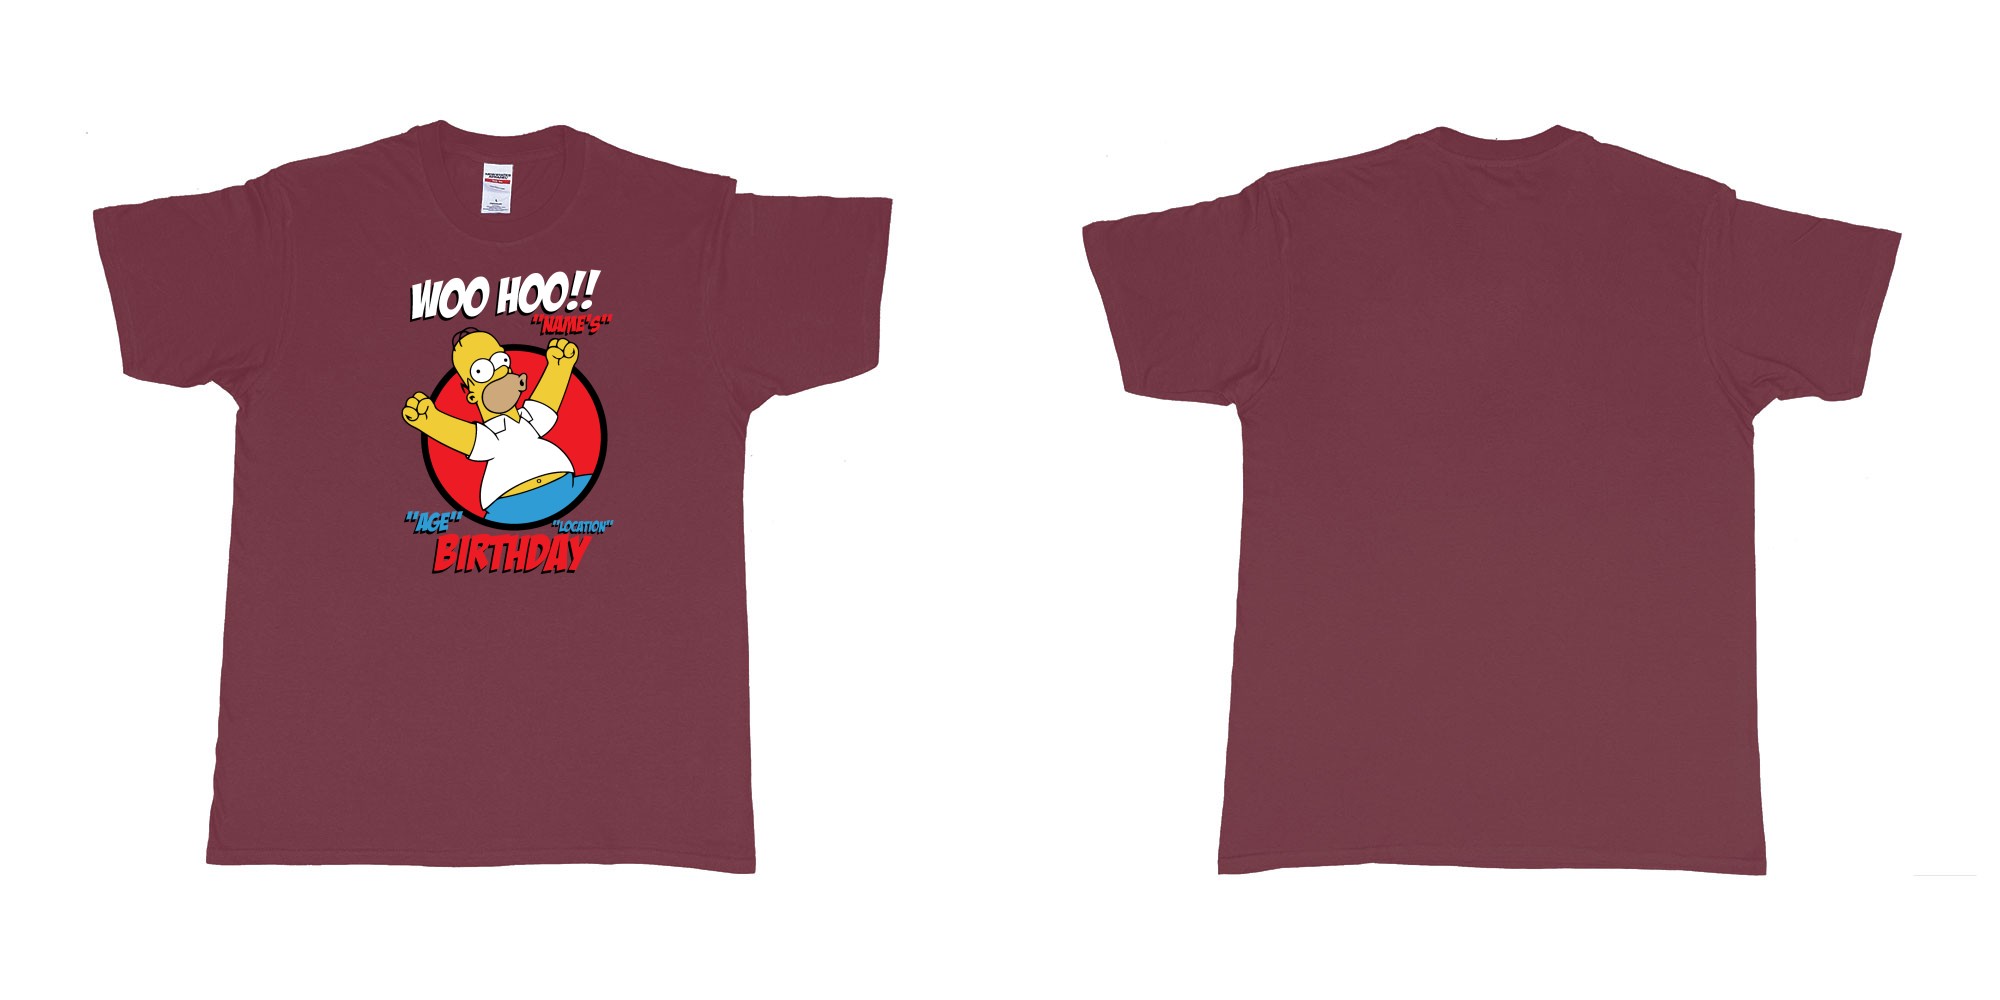 Custom tshirt design homer simpson woo hoo custom age name birthday in fabric color marron choice your own text made in Bali by The Pirate Way